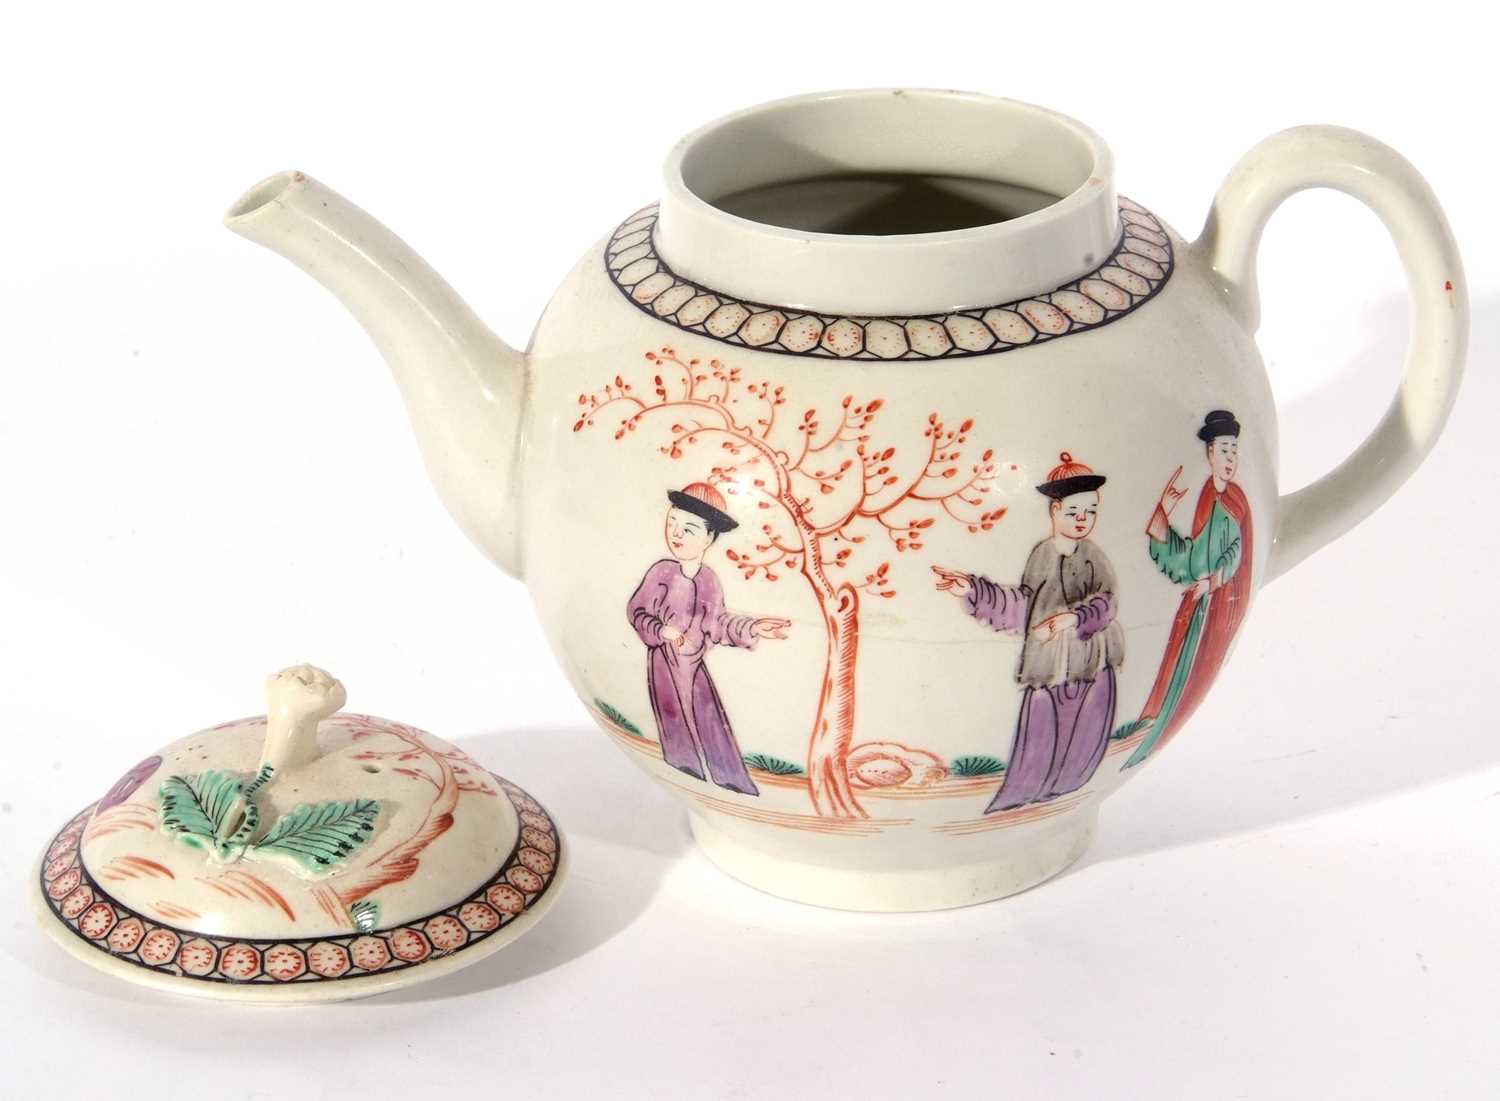 Lowestoft porcelain tea pot, circa 1780, with a polychrome design of Chinese figures by a tree, - Image 4 of 8